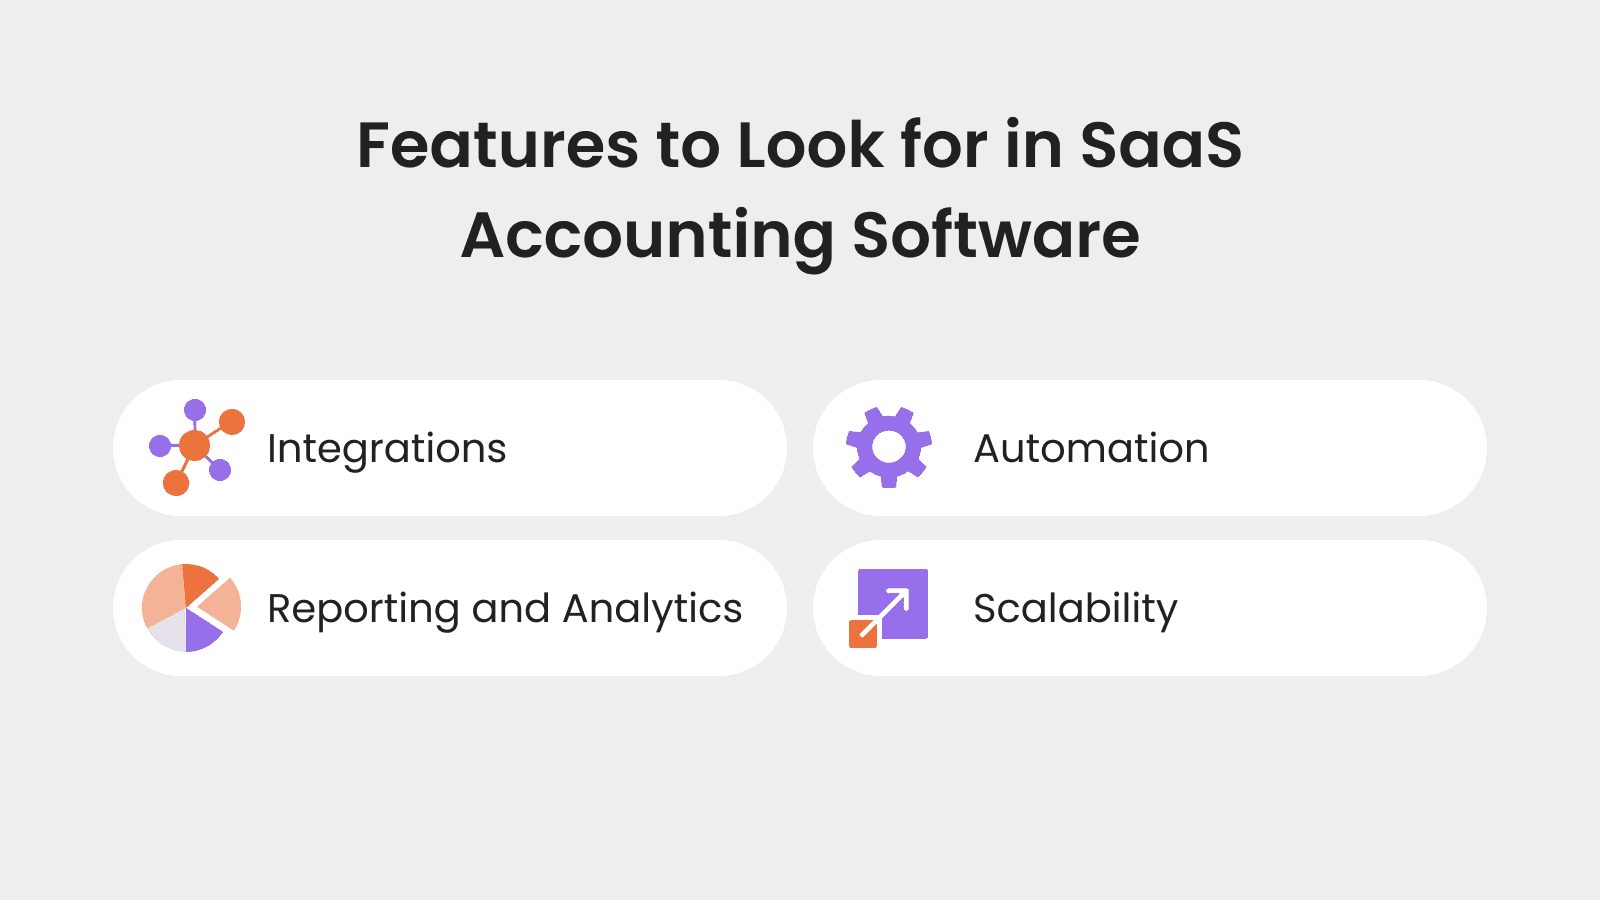 Features to Look for in SaaS Accounting Software